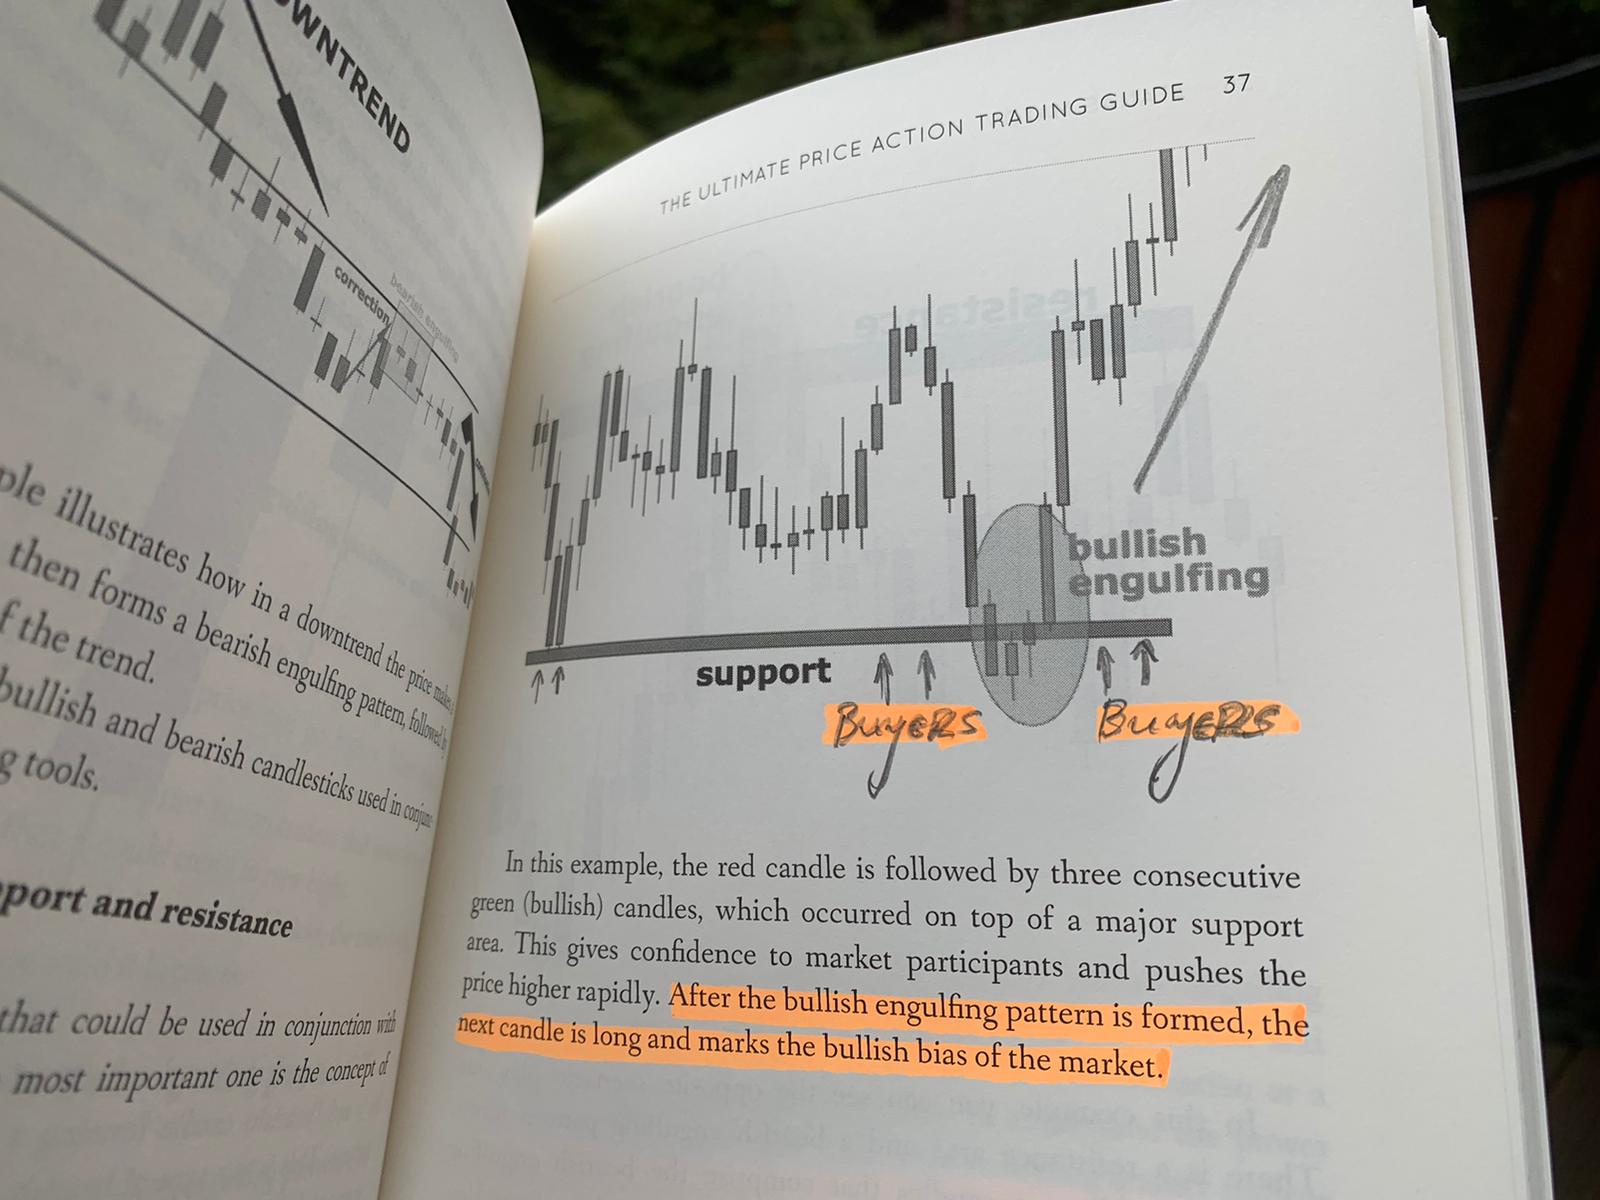 Stream episode Book Day Trading Chart Patterns : Price Action